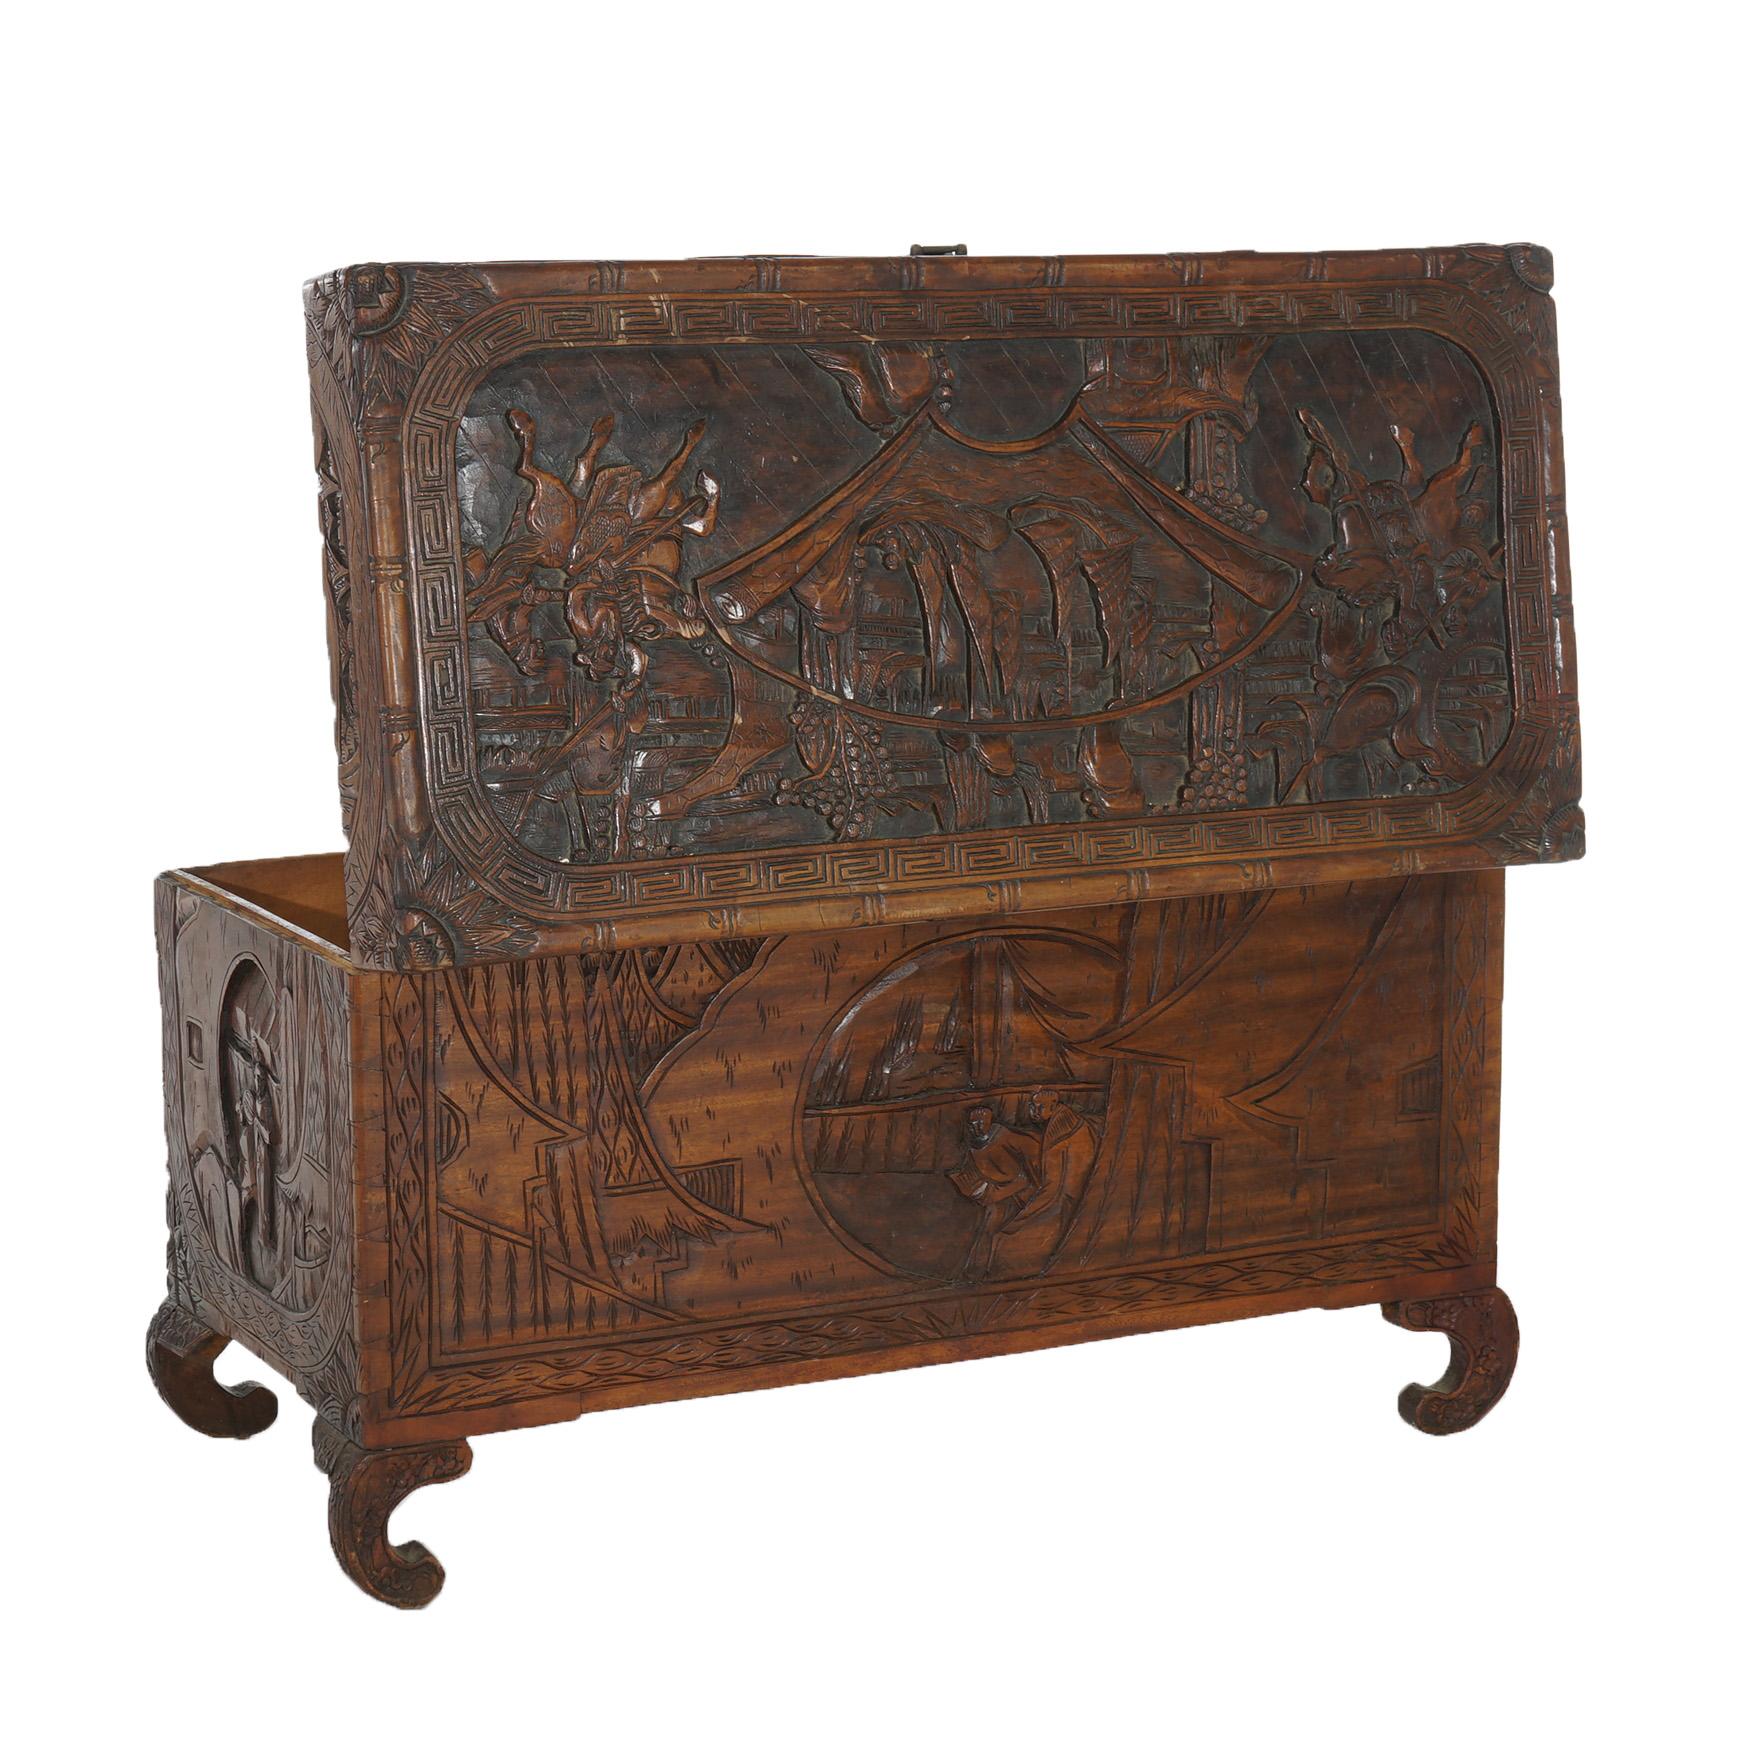 Antique Chinese Carved Hardwood Chest with Figures & Scenes in Relief C1920 For Sale 8